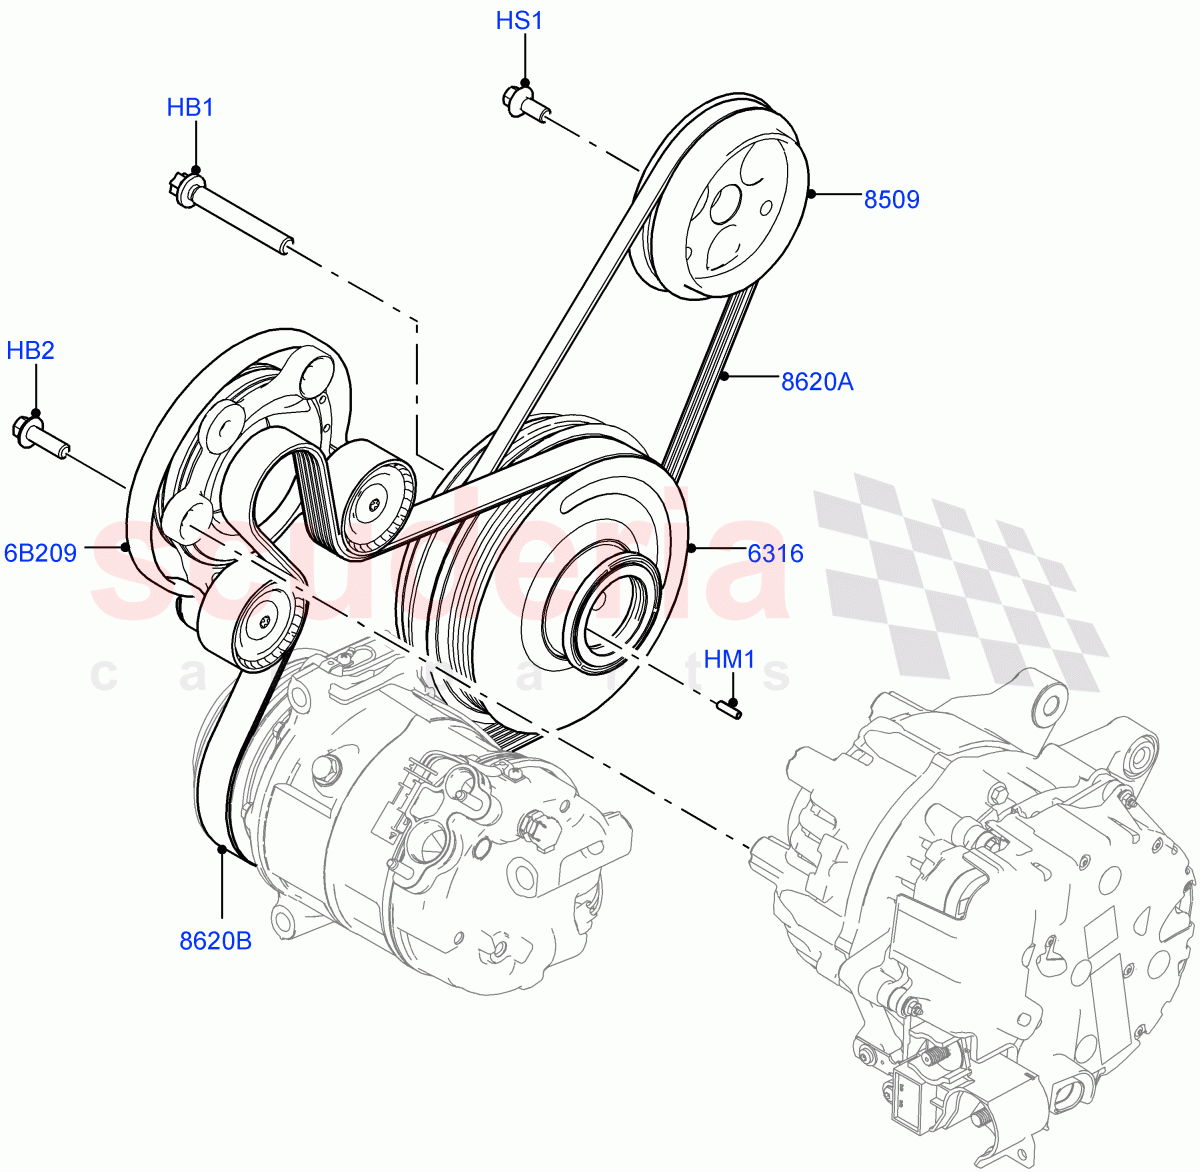 Pulleys And Drive Belts(2.0L AJ20D4 Diesel High PTA,Halewood (UK),Electric Engine Battery-MHEV,2.0L AJ20D4 Diesel LF PTA,2.0L AJ20D4 Diesel Mid PTA) of Land Rover Land Rover Discovery Sport (2015+) [2.0 Turbo Diesel]